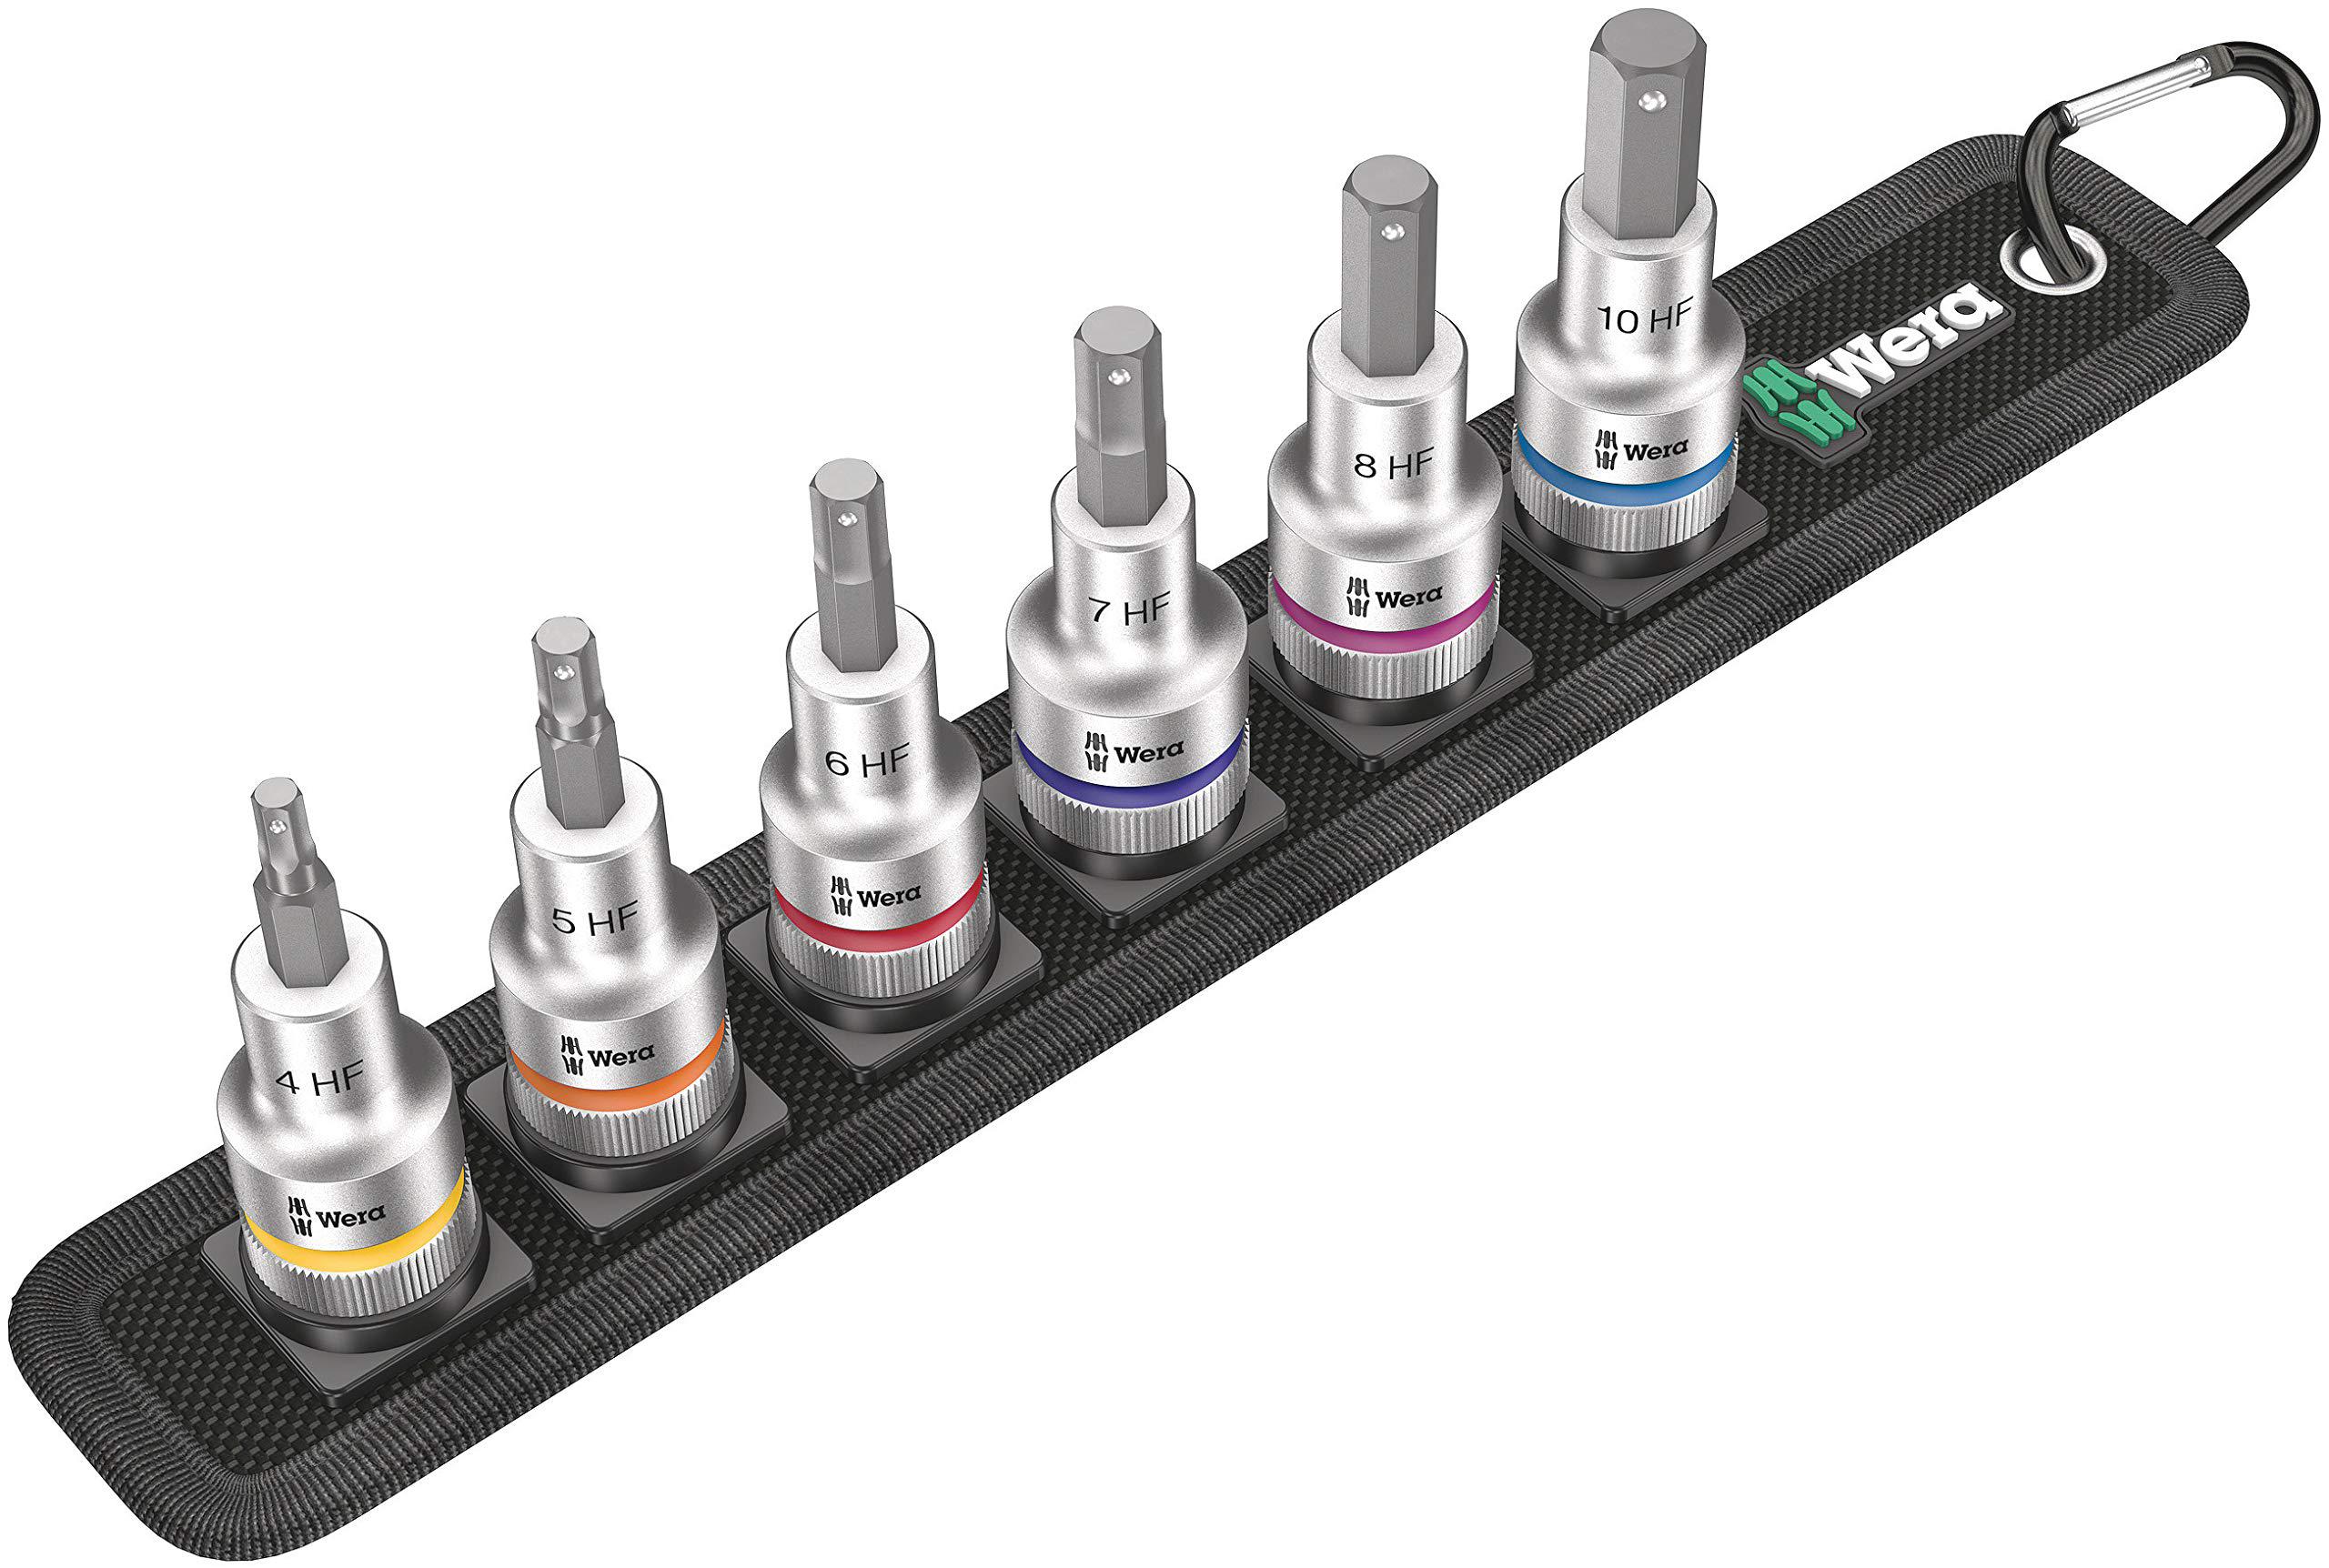 wera 05003996001 belt c 2 zyklop in-hex-plus bit socket set with holding function, 1/2" drive, 6 pieces